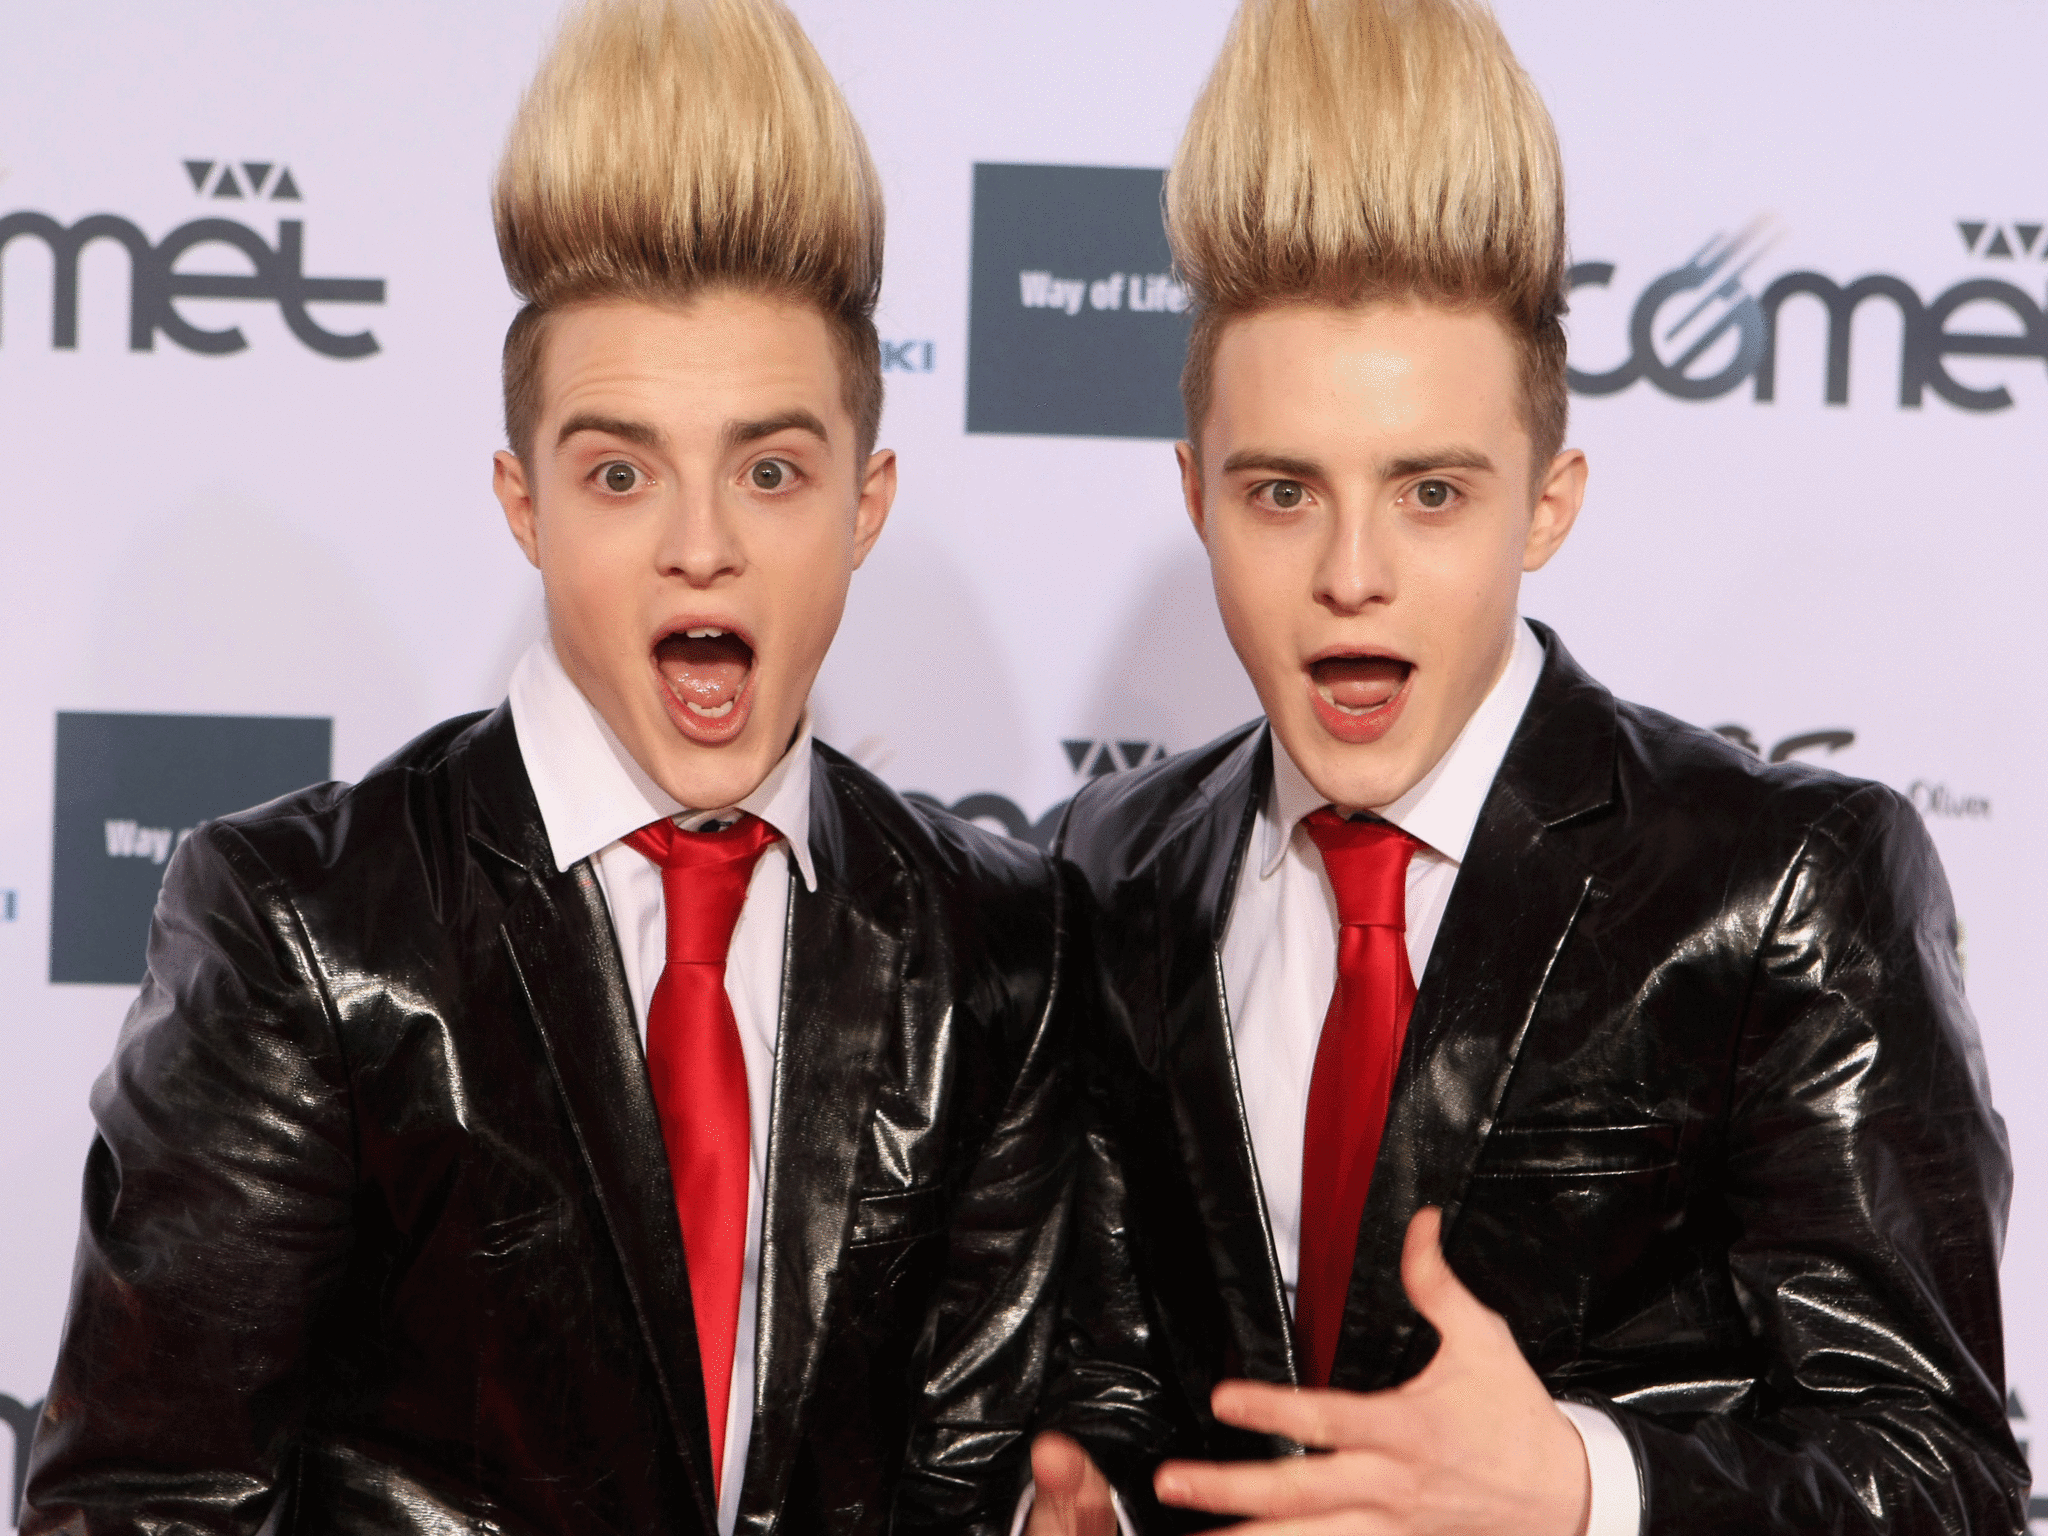 Jedward Lookalike Stole A Sex Toy And Hairspray Because He Liked To Look Good The